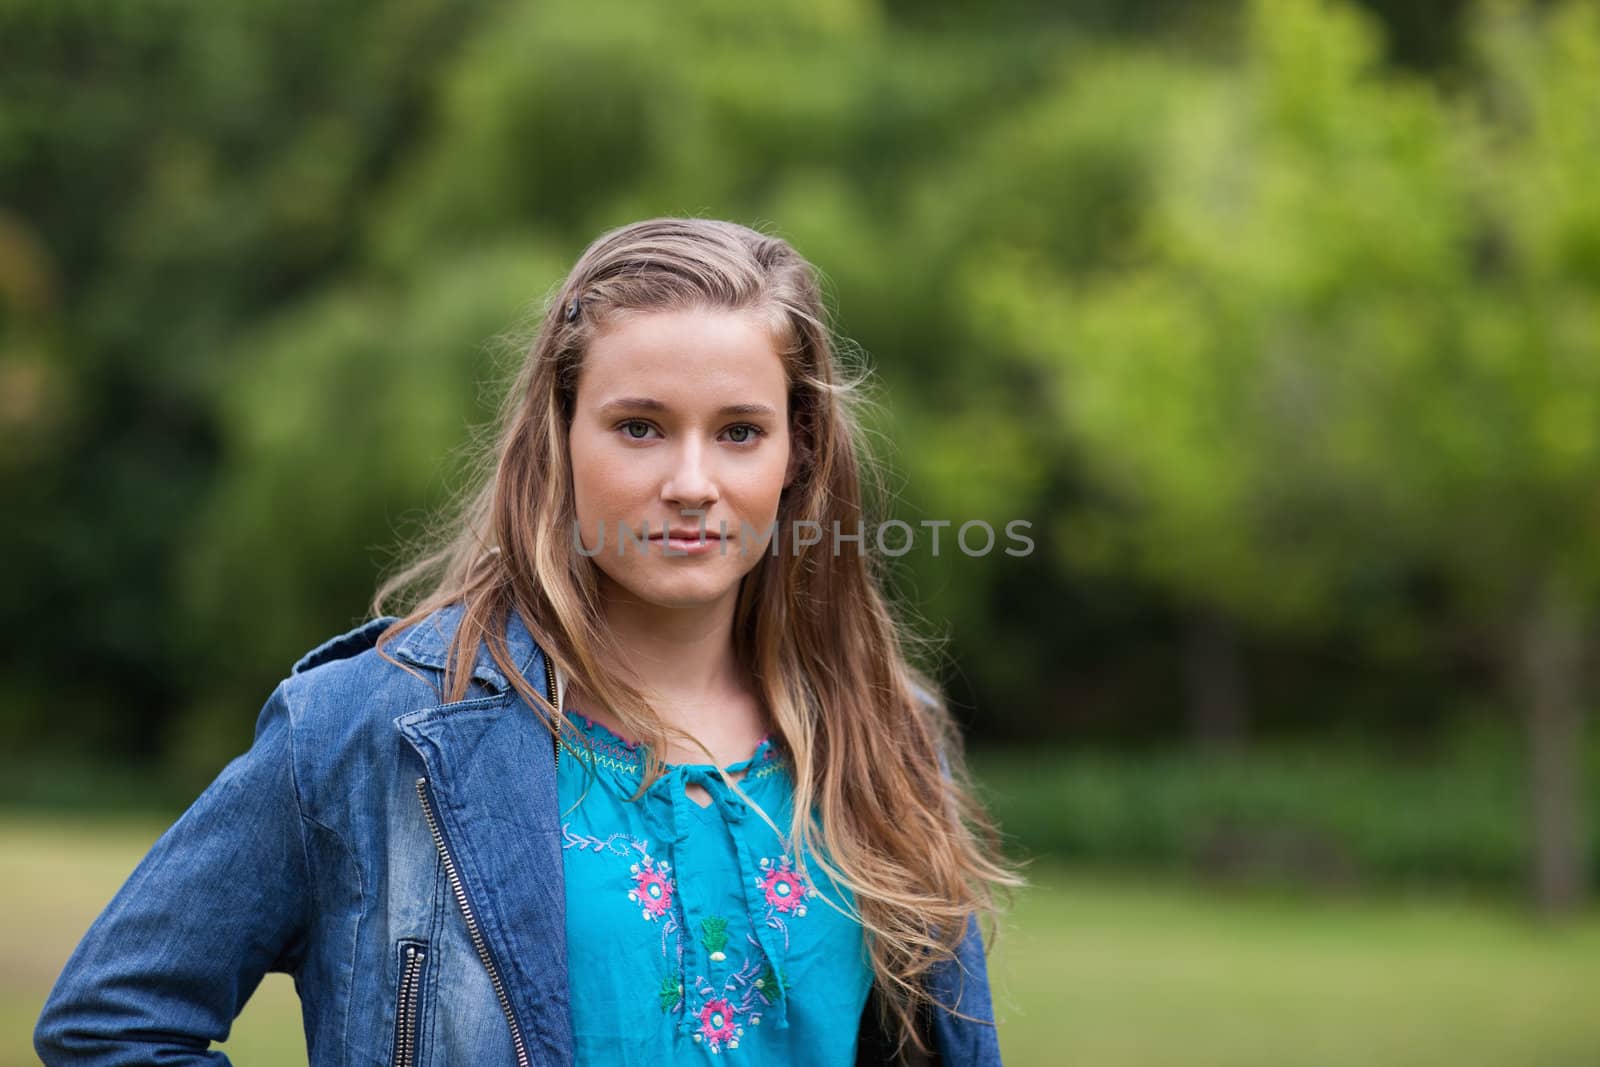 Teenager standing upright in a park while looking ahead seriously